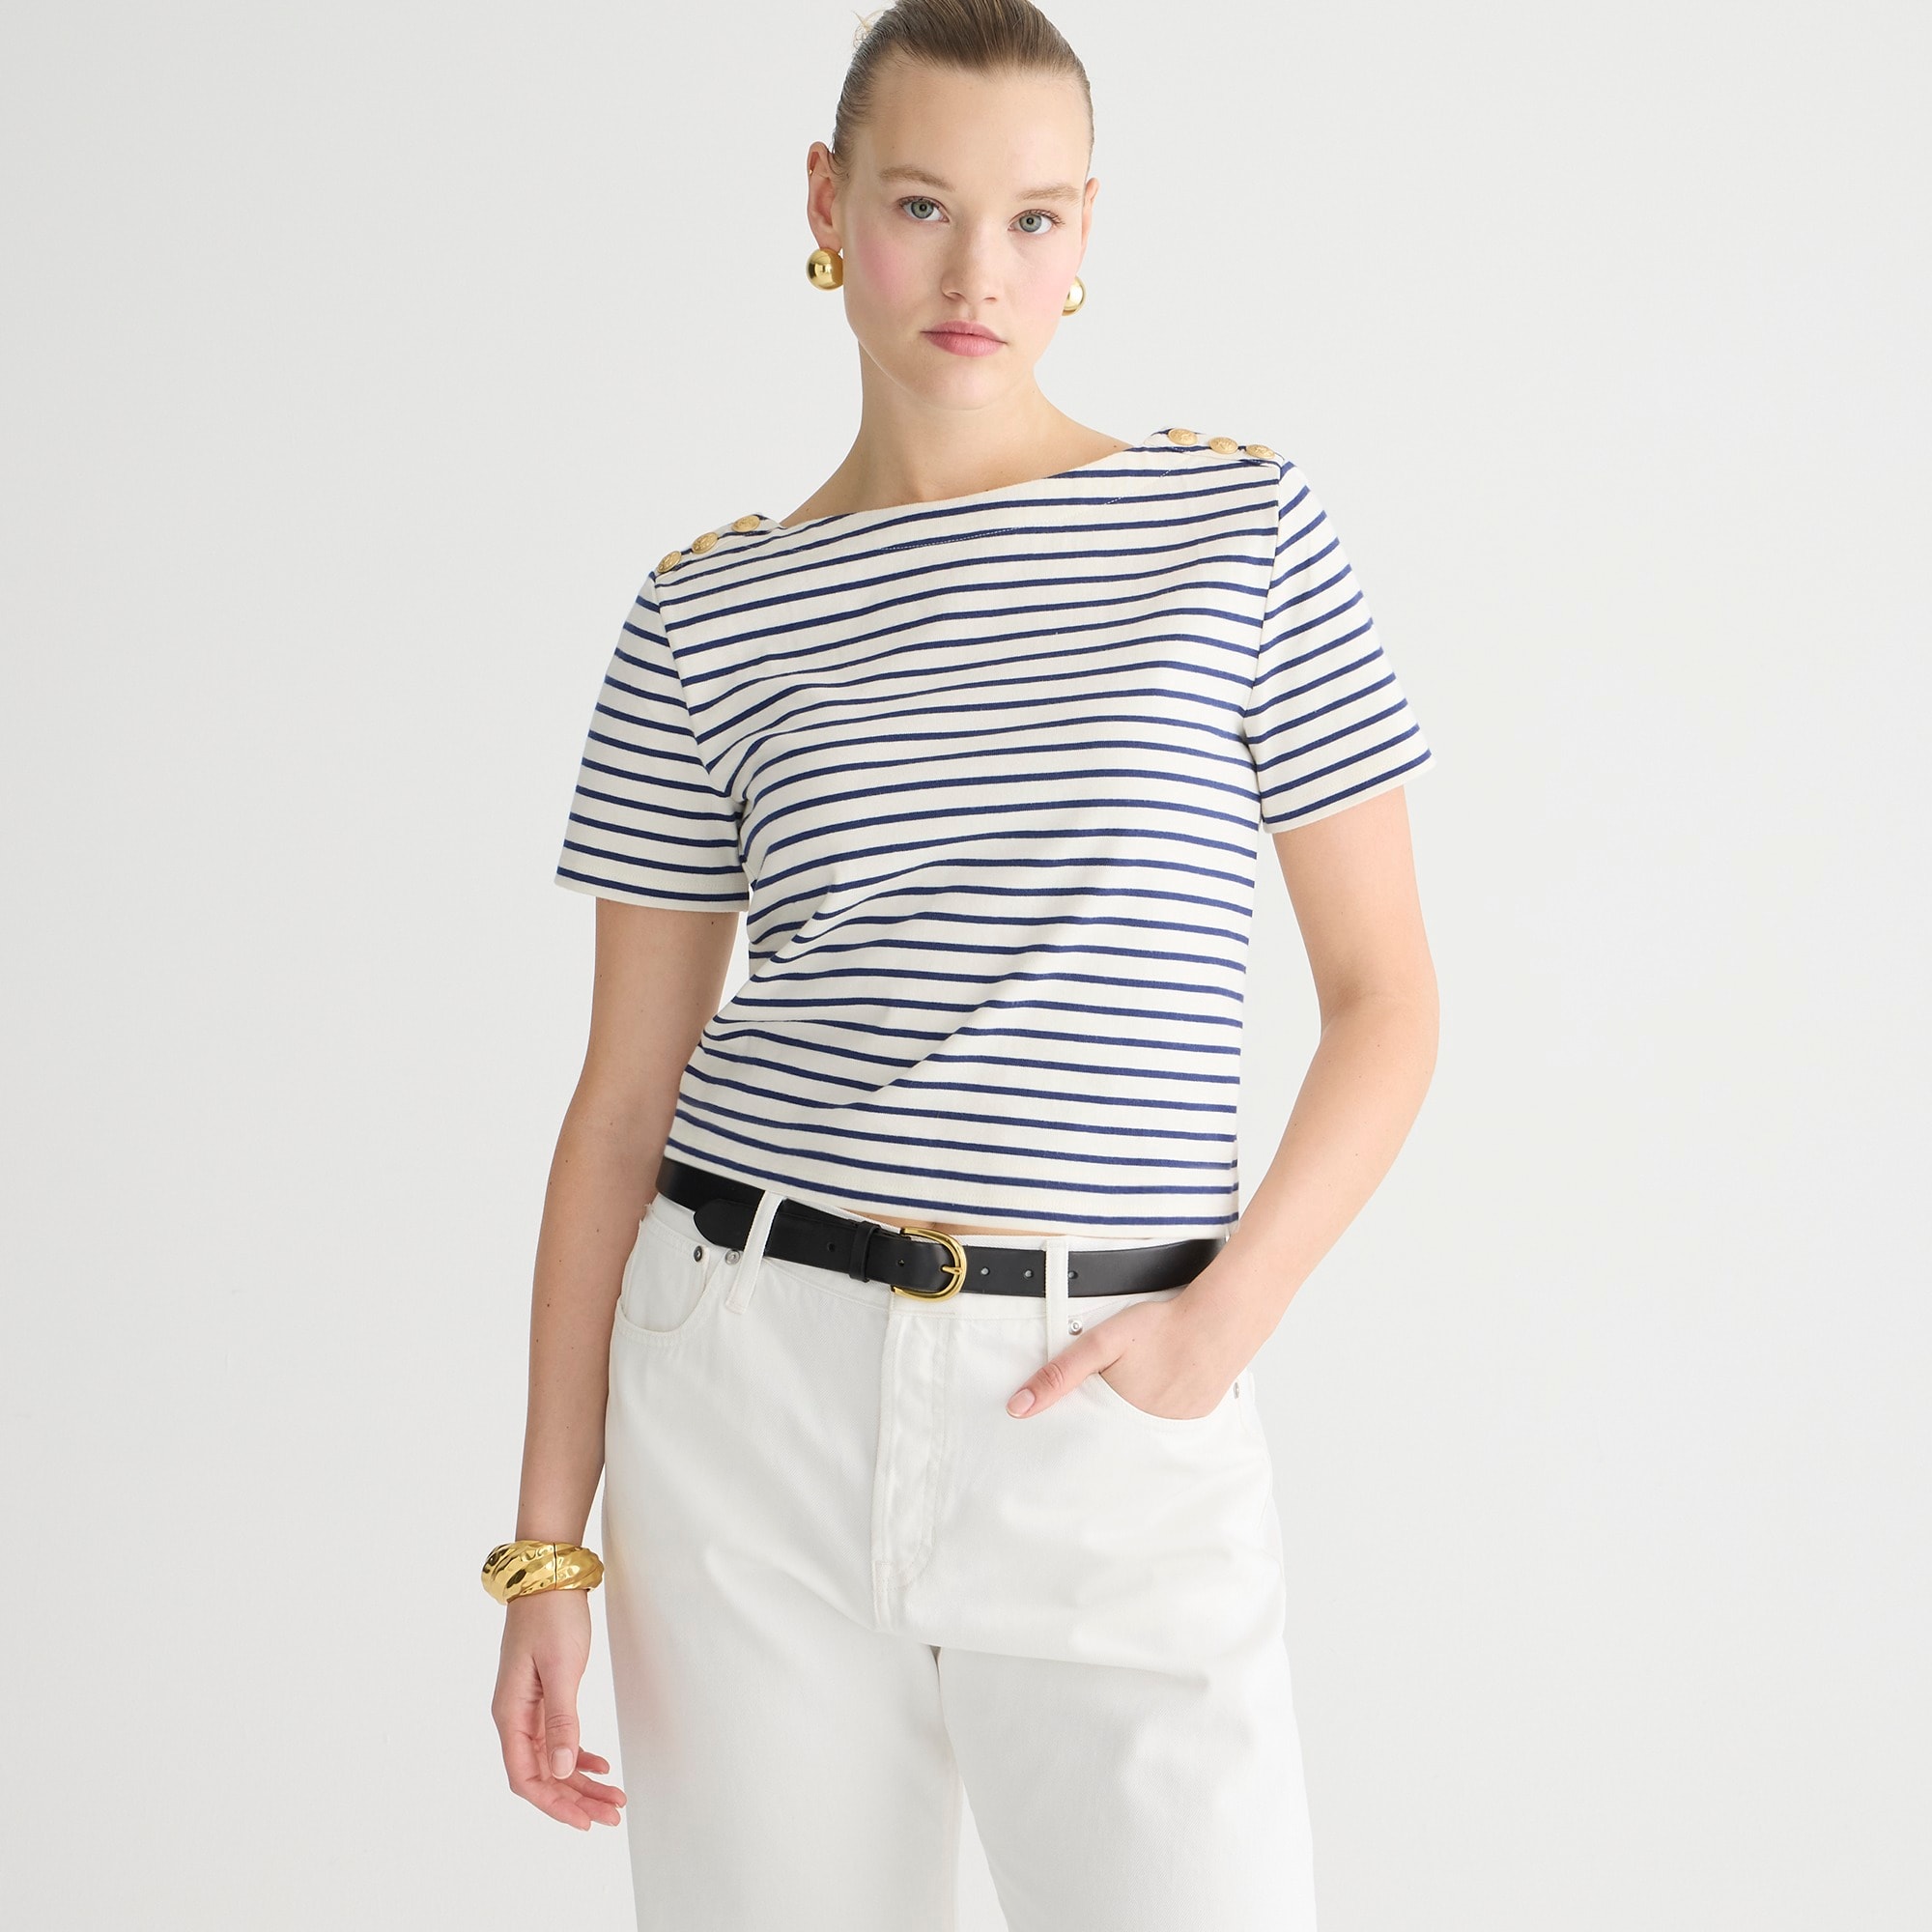  Mariner cloth short-sleeve T-shirt with buttons in stripe